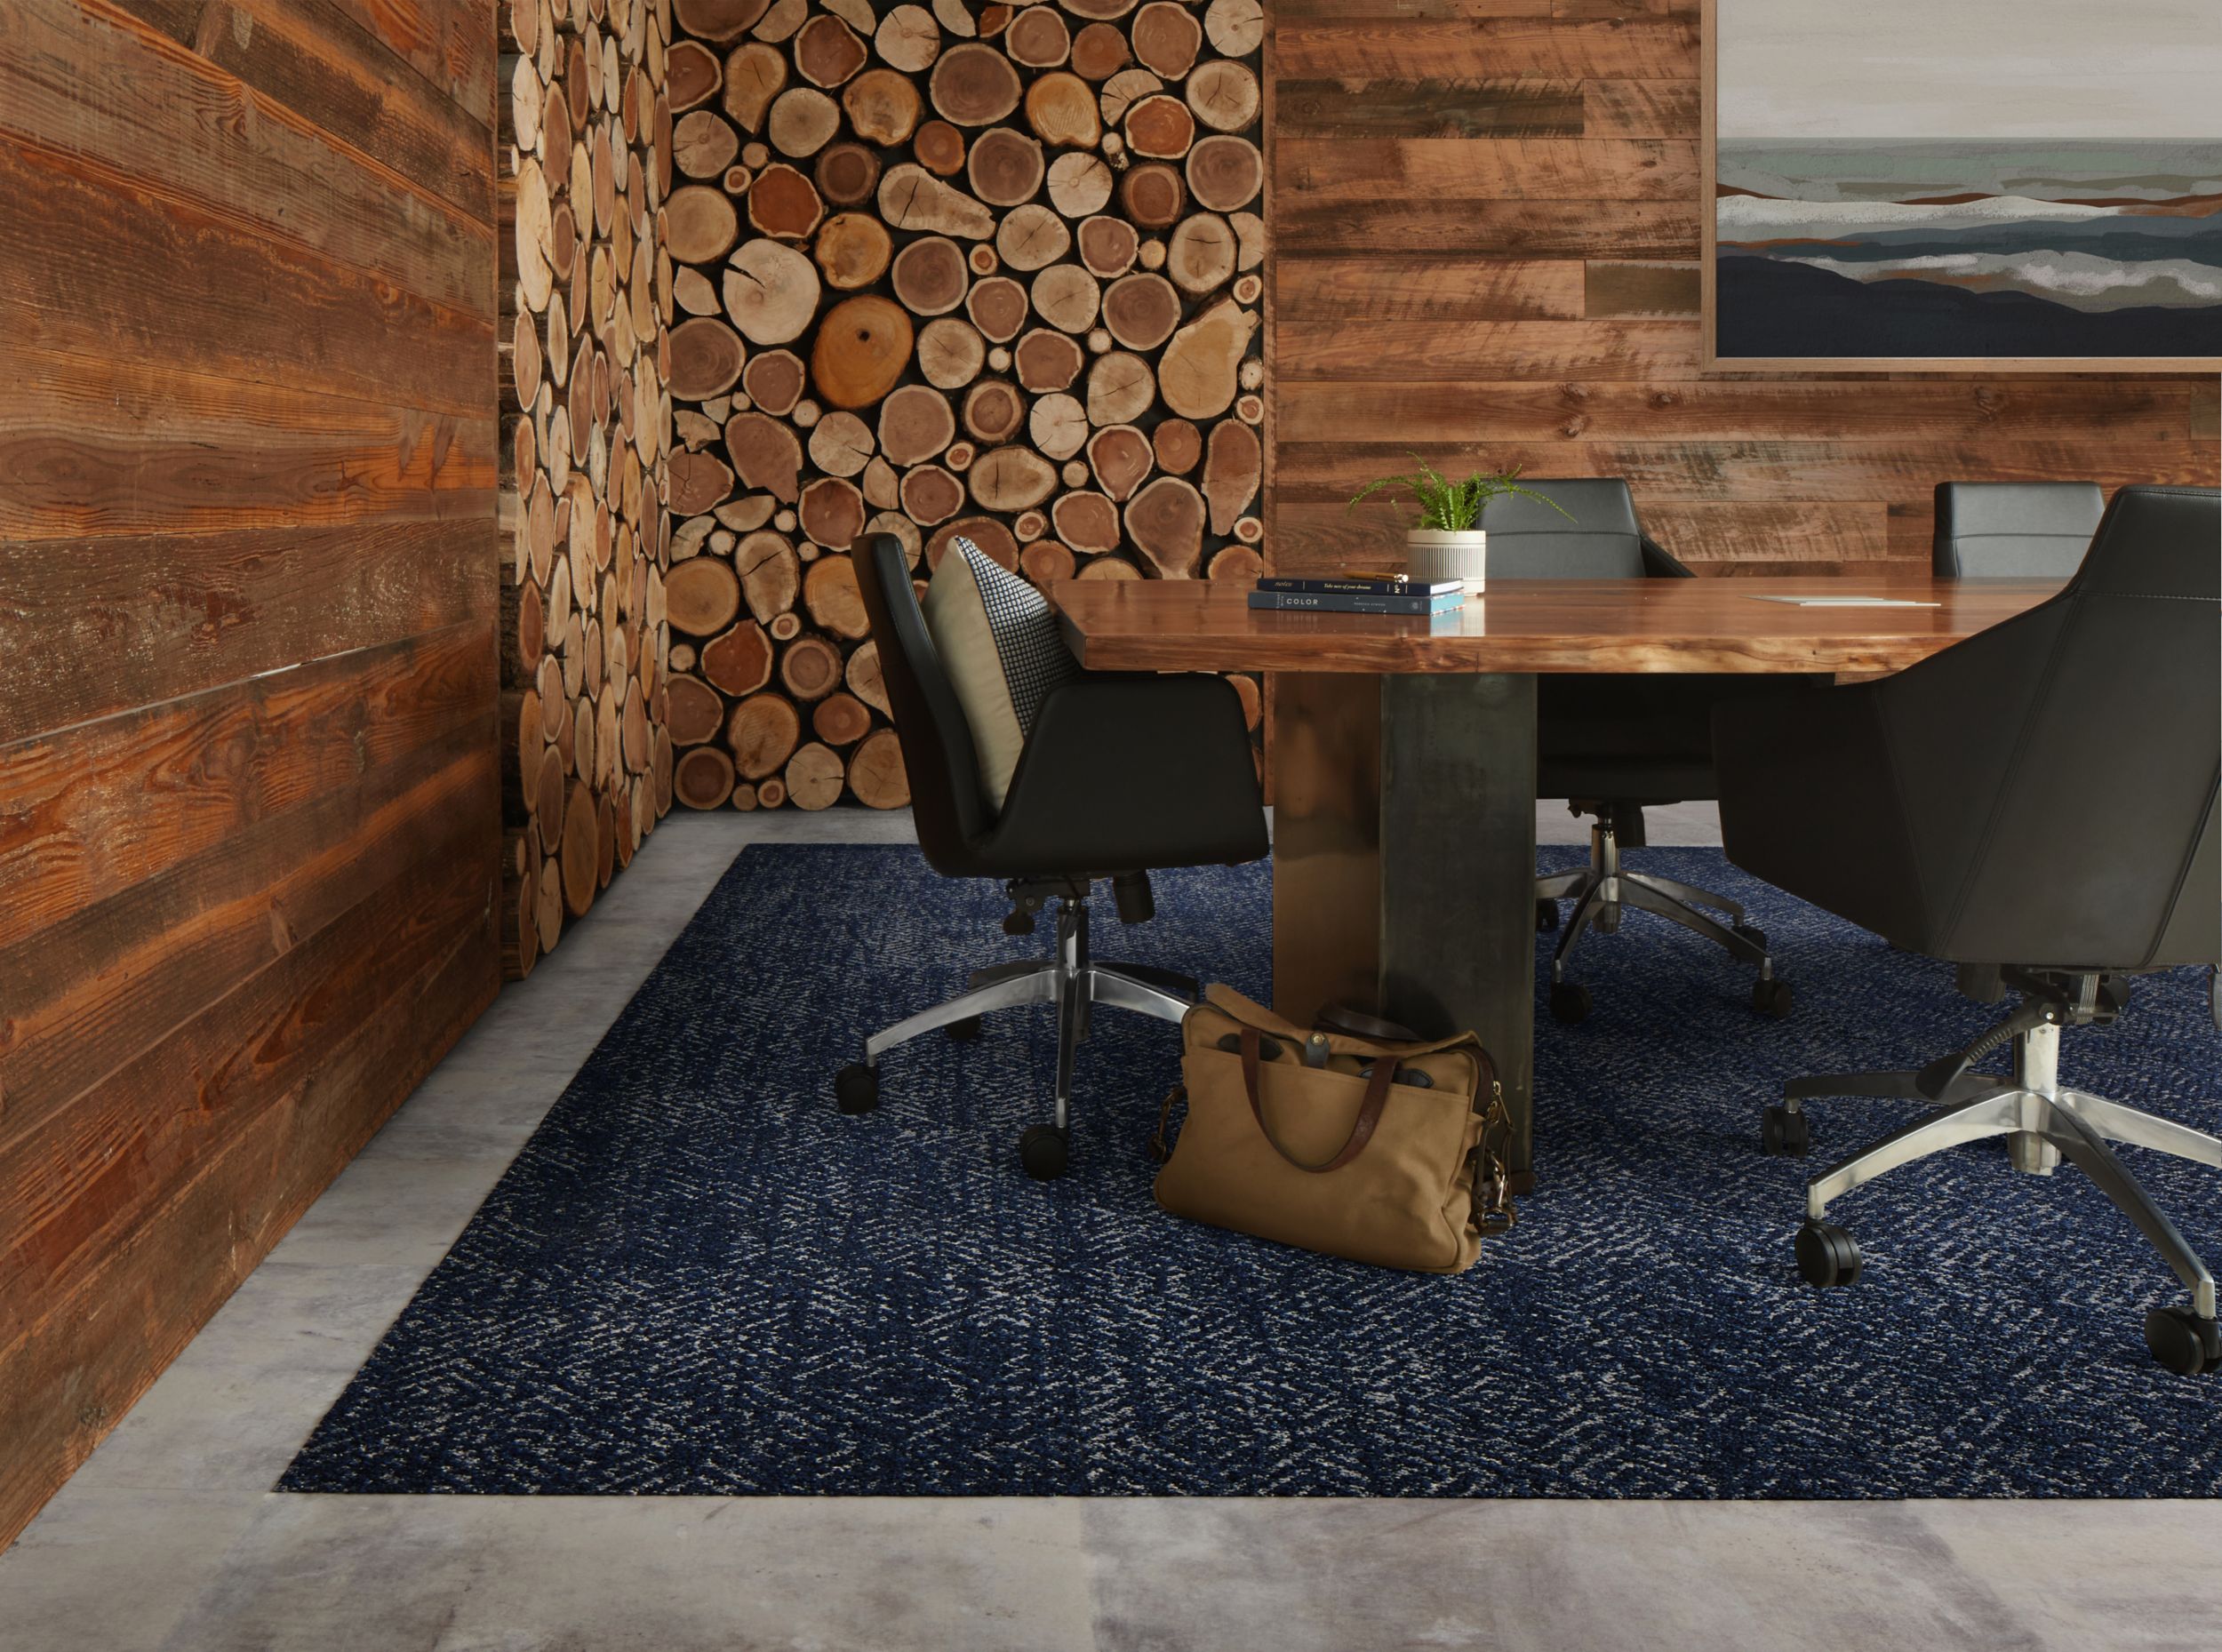 Interface Third Space 309 carpet tile with Textured Stones LVT in meeting room with wood walls and accents numéro d’image 7